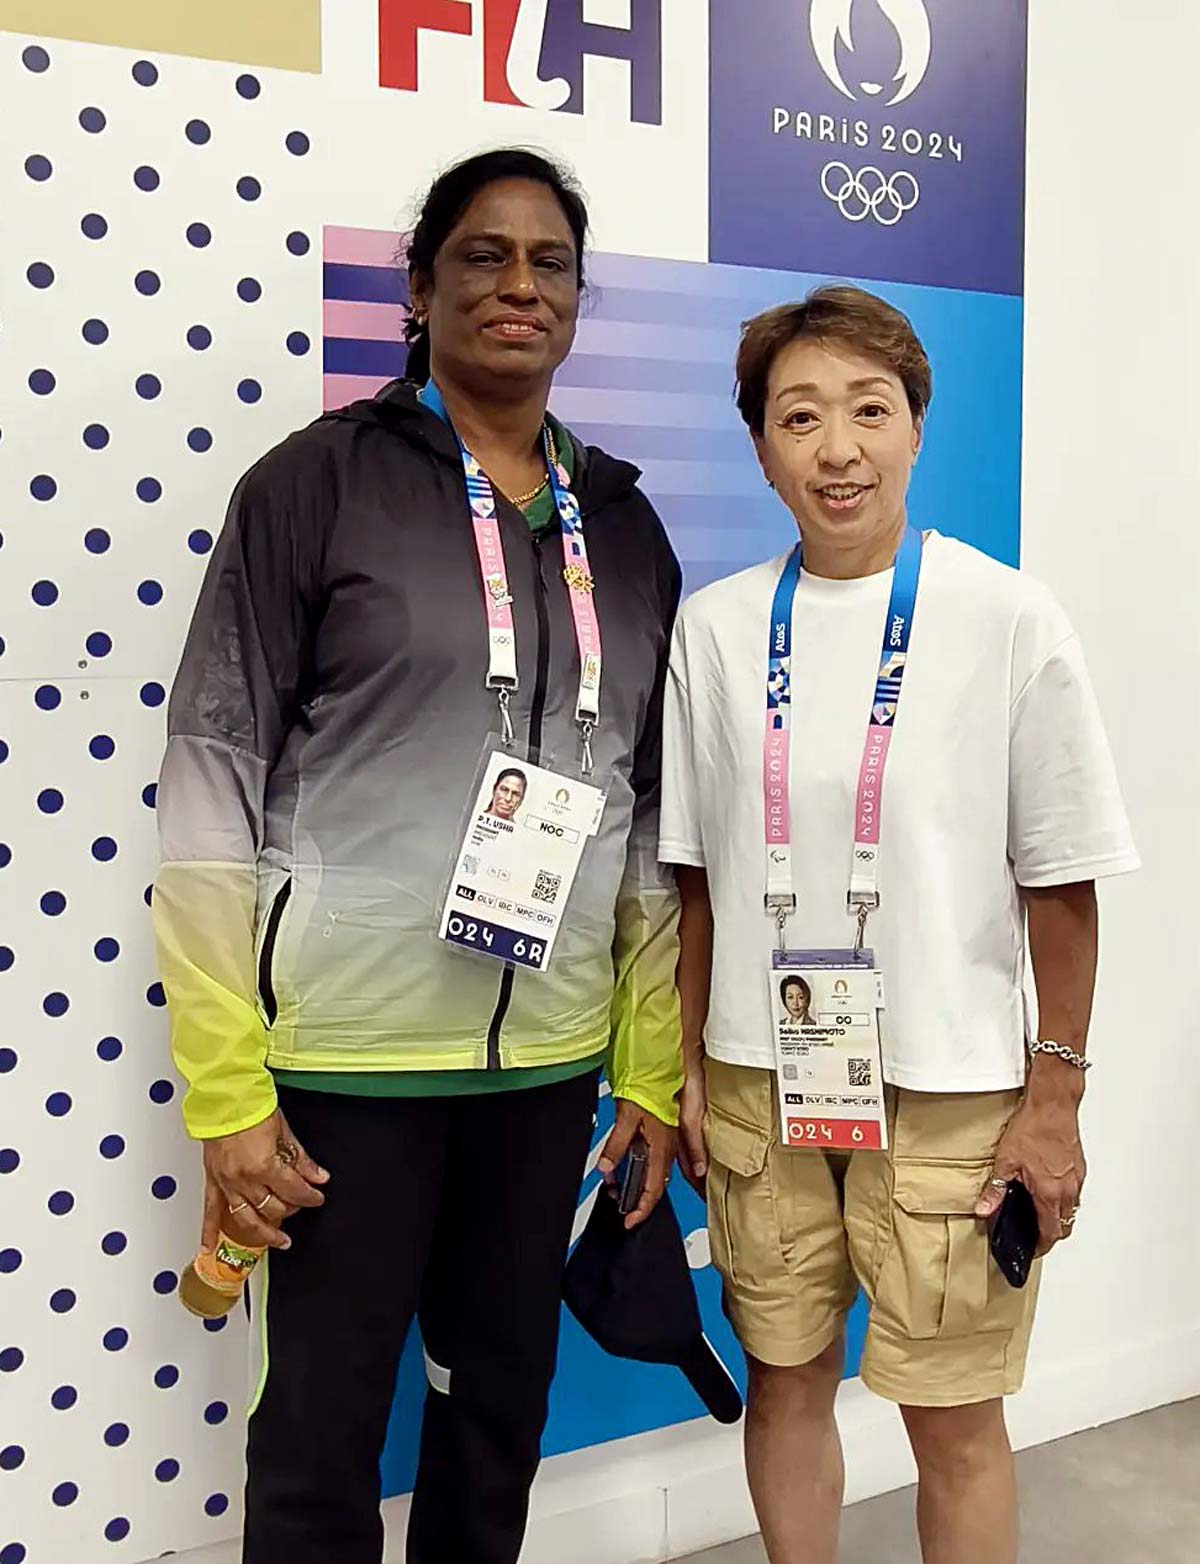  Indian Olympic Association (IOA) President PT Usha meets with the President of the Tokyo Organising Committee of Olympics Seiko Hashimoto, in Paris on Monday